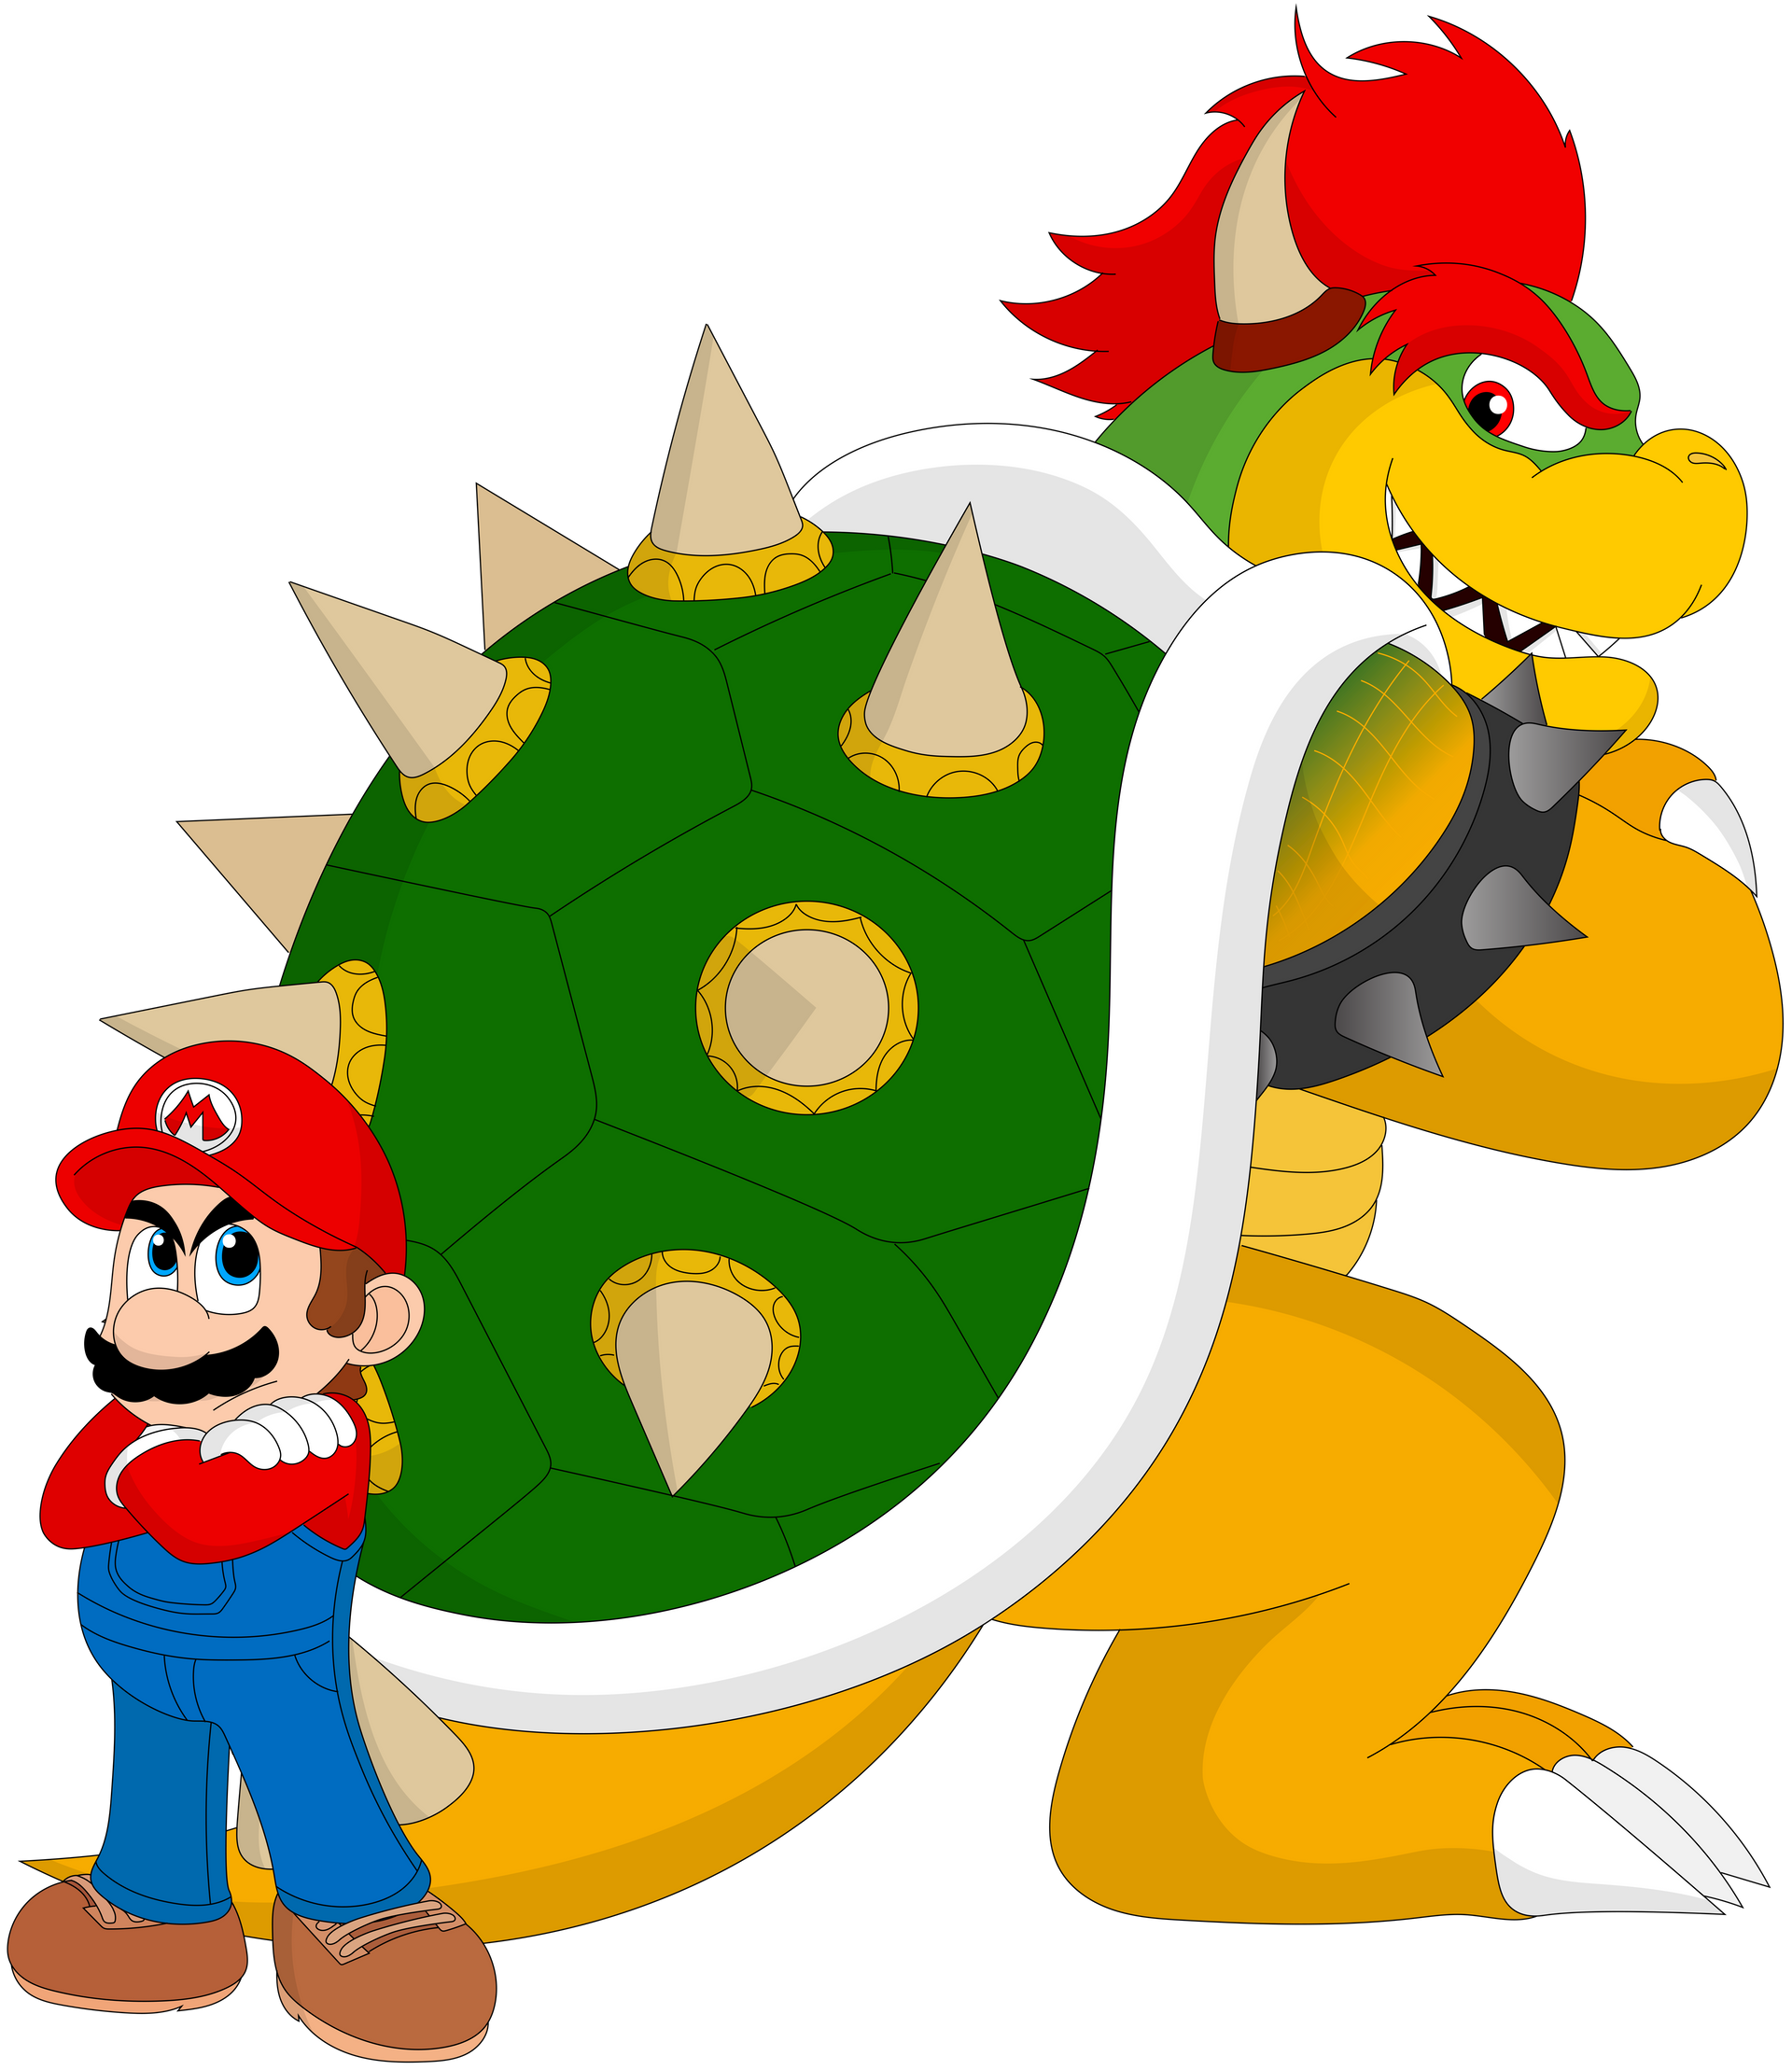 Super Mario Movie - Bowser Redraw by NoahtheArtWizard2001 on